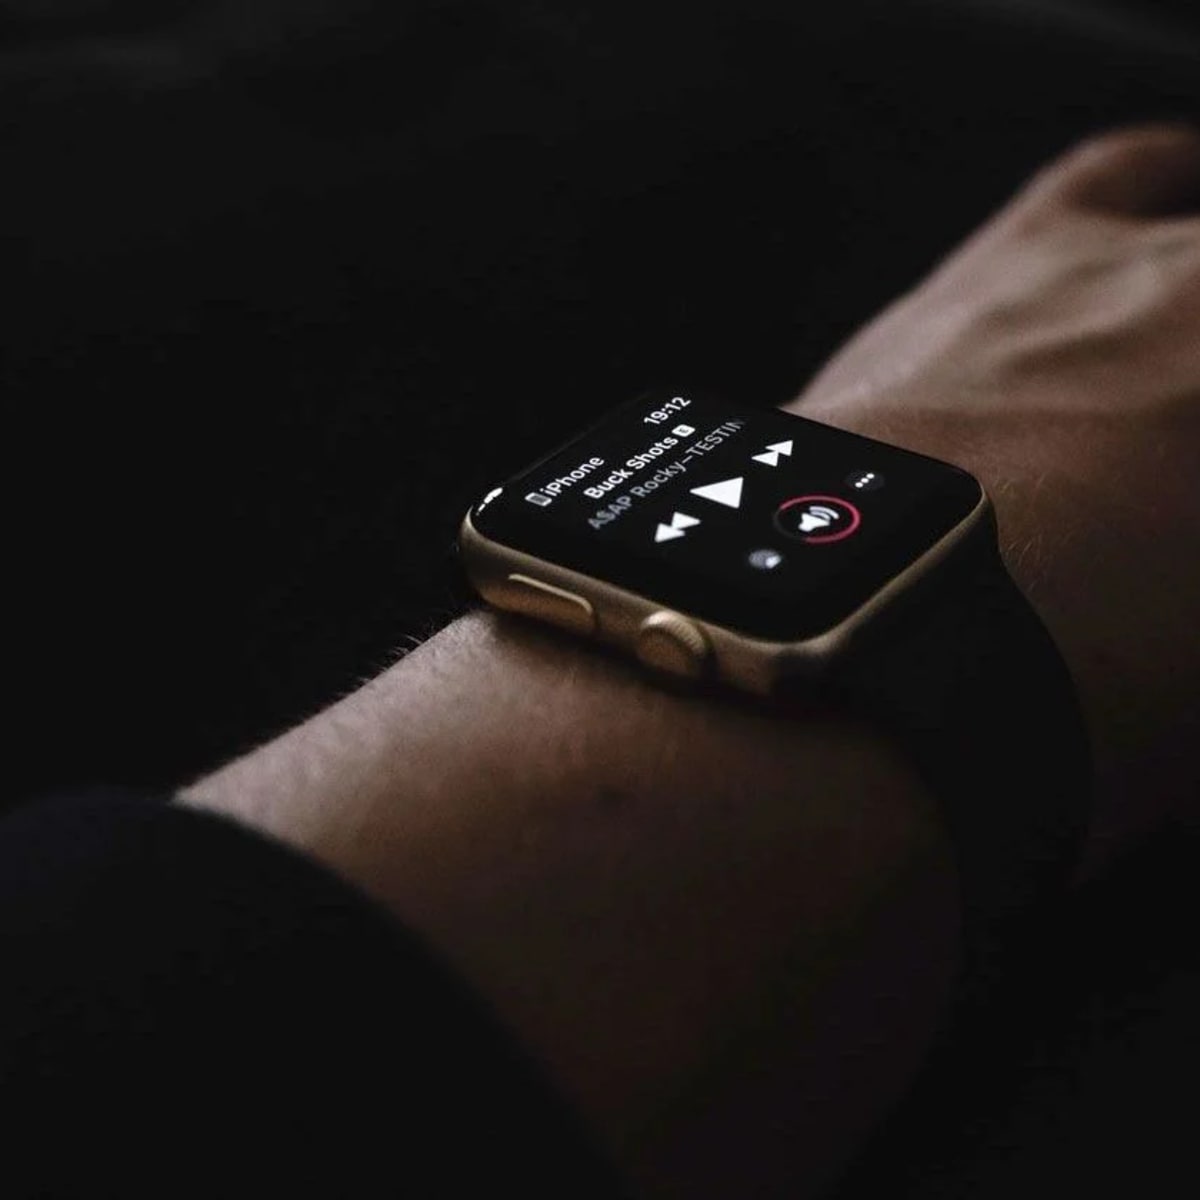 spotify on apple watch without phone